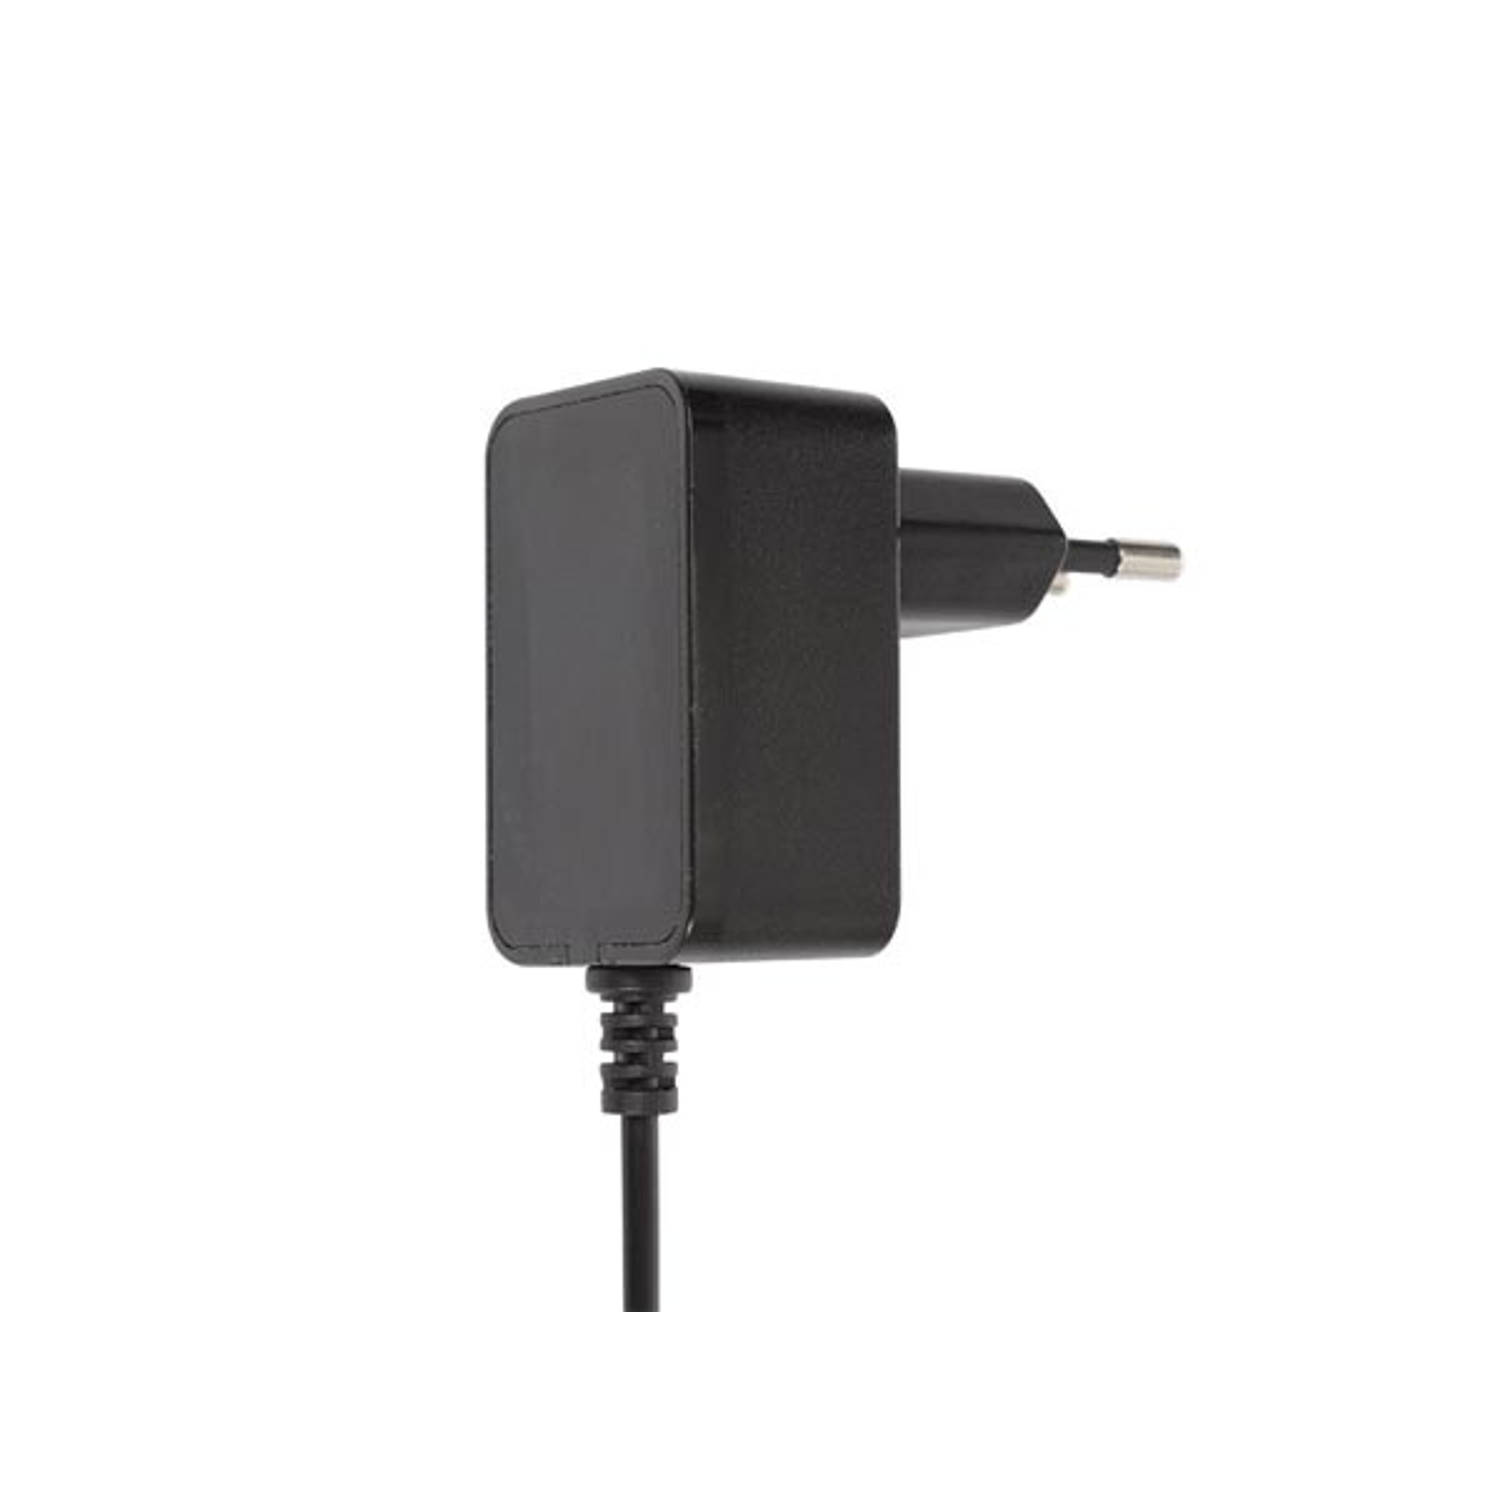 UNIVERSELE VOEDING - 12 VDC - 1.5 A - 18 W - CONNECTOR (2.1 x 5.5 mm)